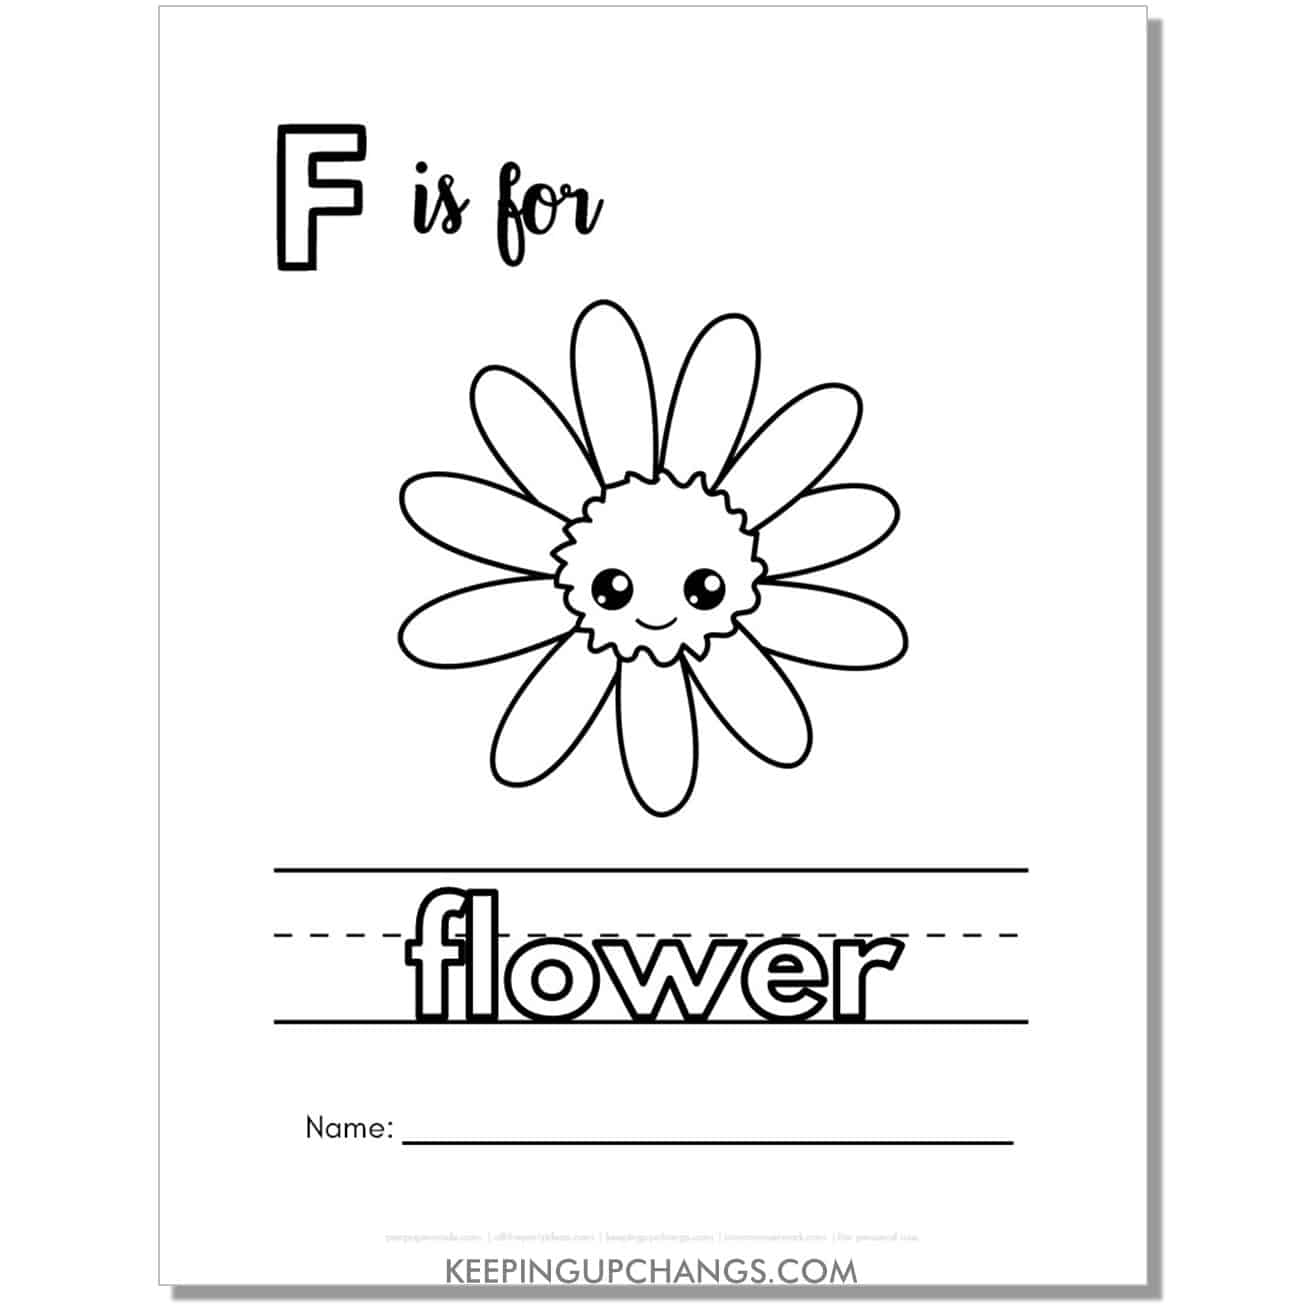 cute letter f coloring page worksheet with flower.